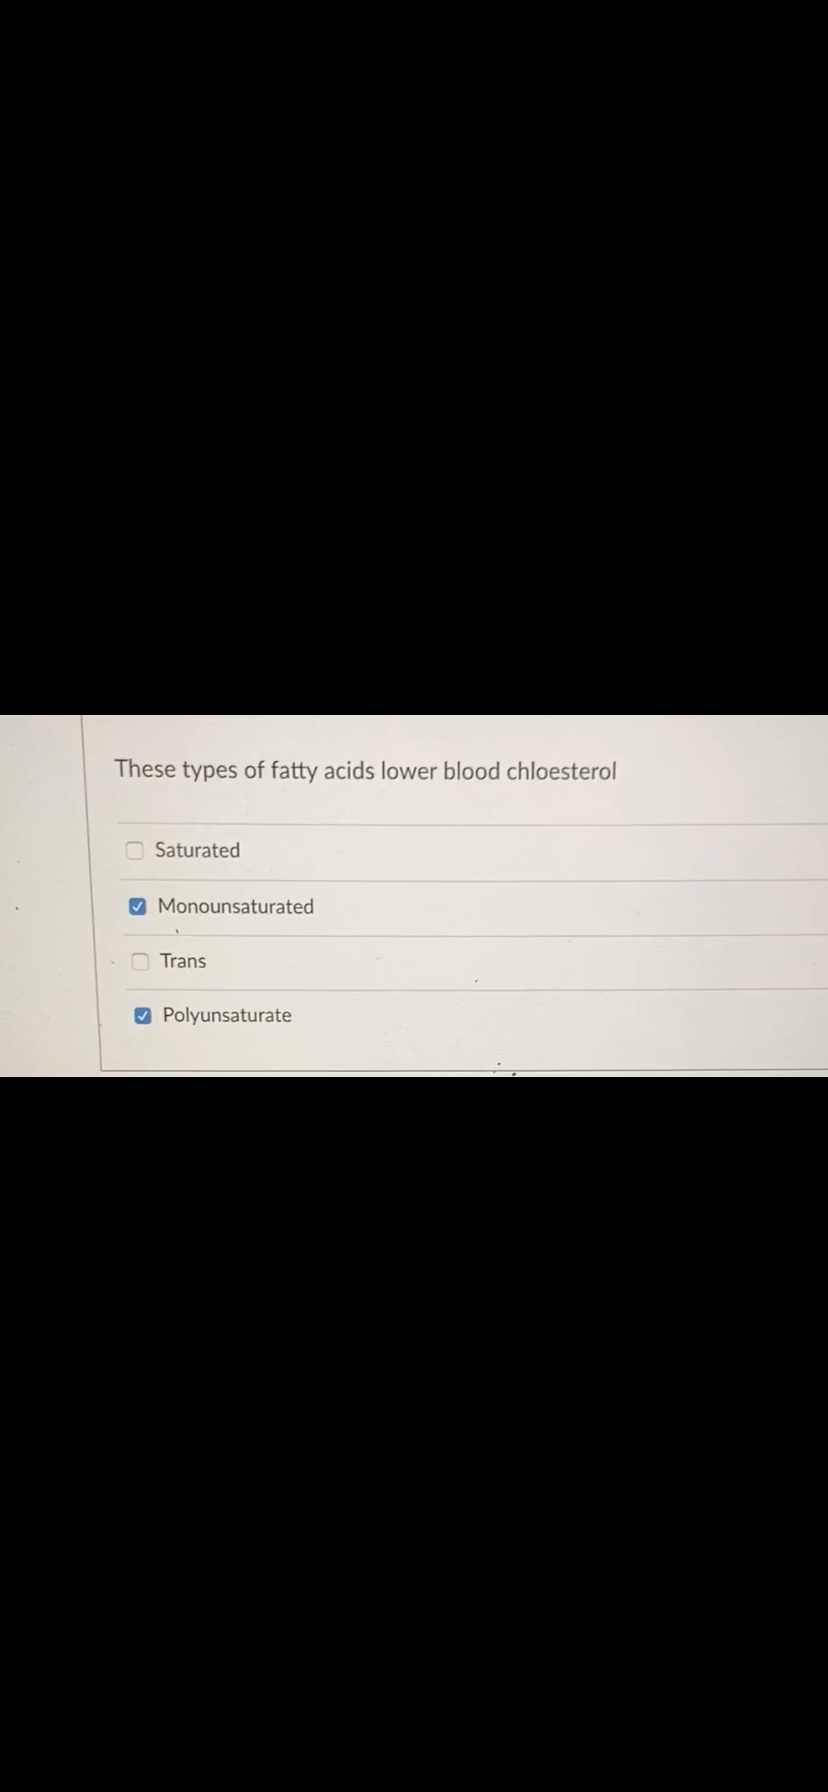 These types of fatty acids lower blood chloesterol
O Saturated
O Monounsaturated
Trans
O Polyunsaturate
